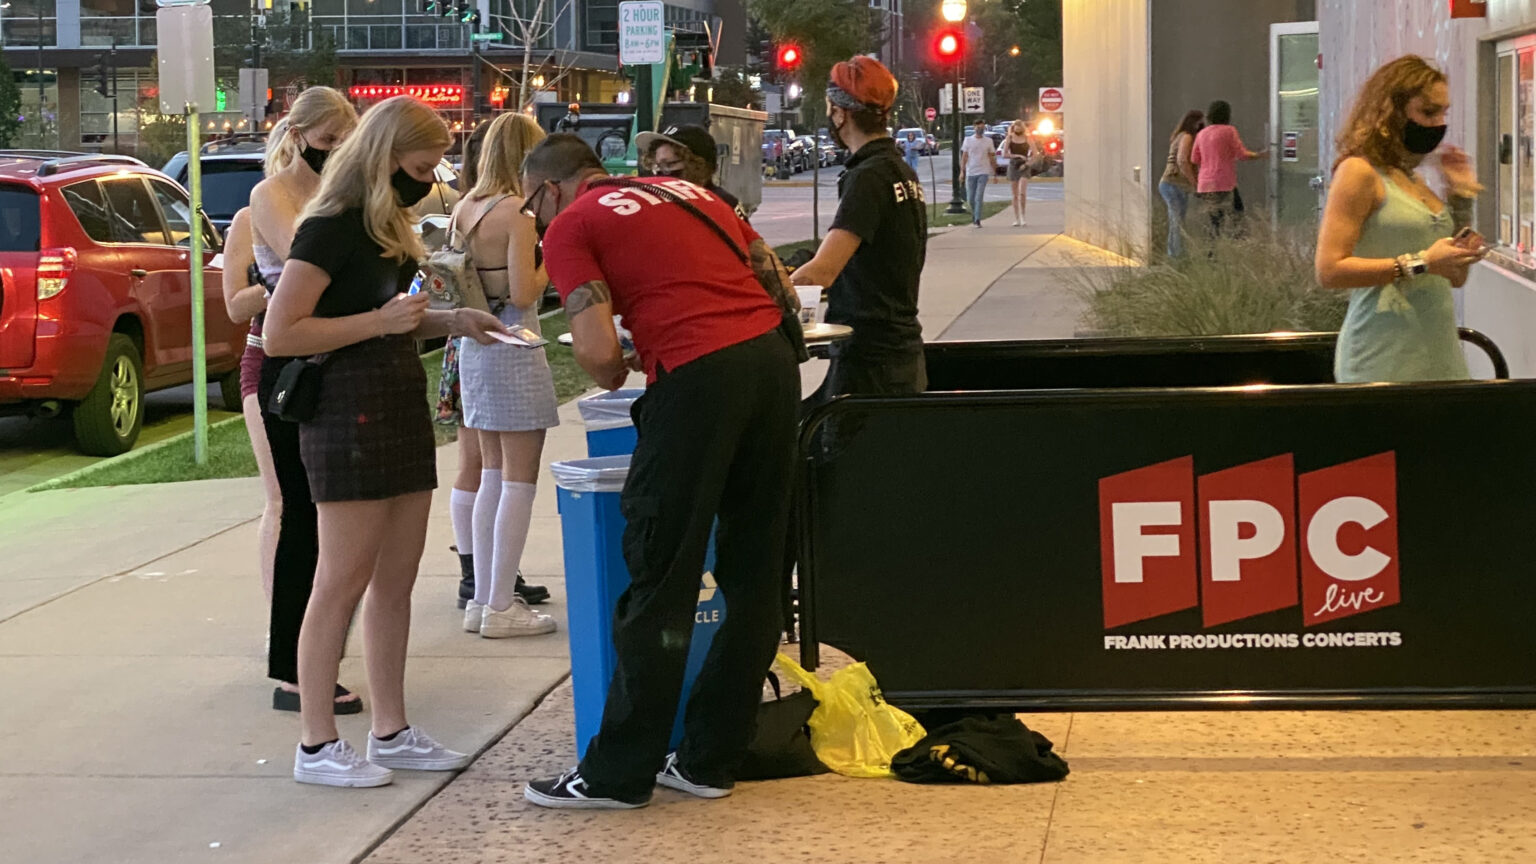 Staff members check IDs and proof of vaccine cards of concert-goers outside a venue in downtown Madison, Wisconsin.